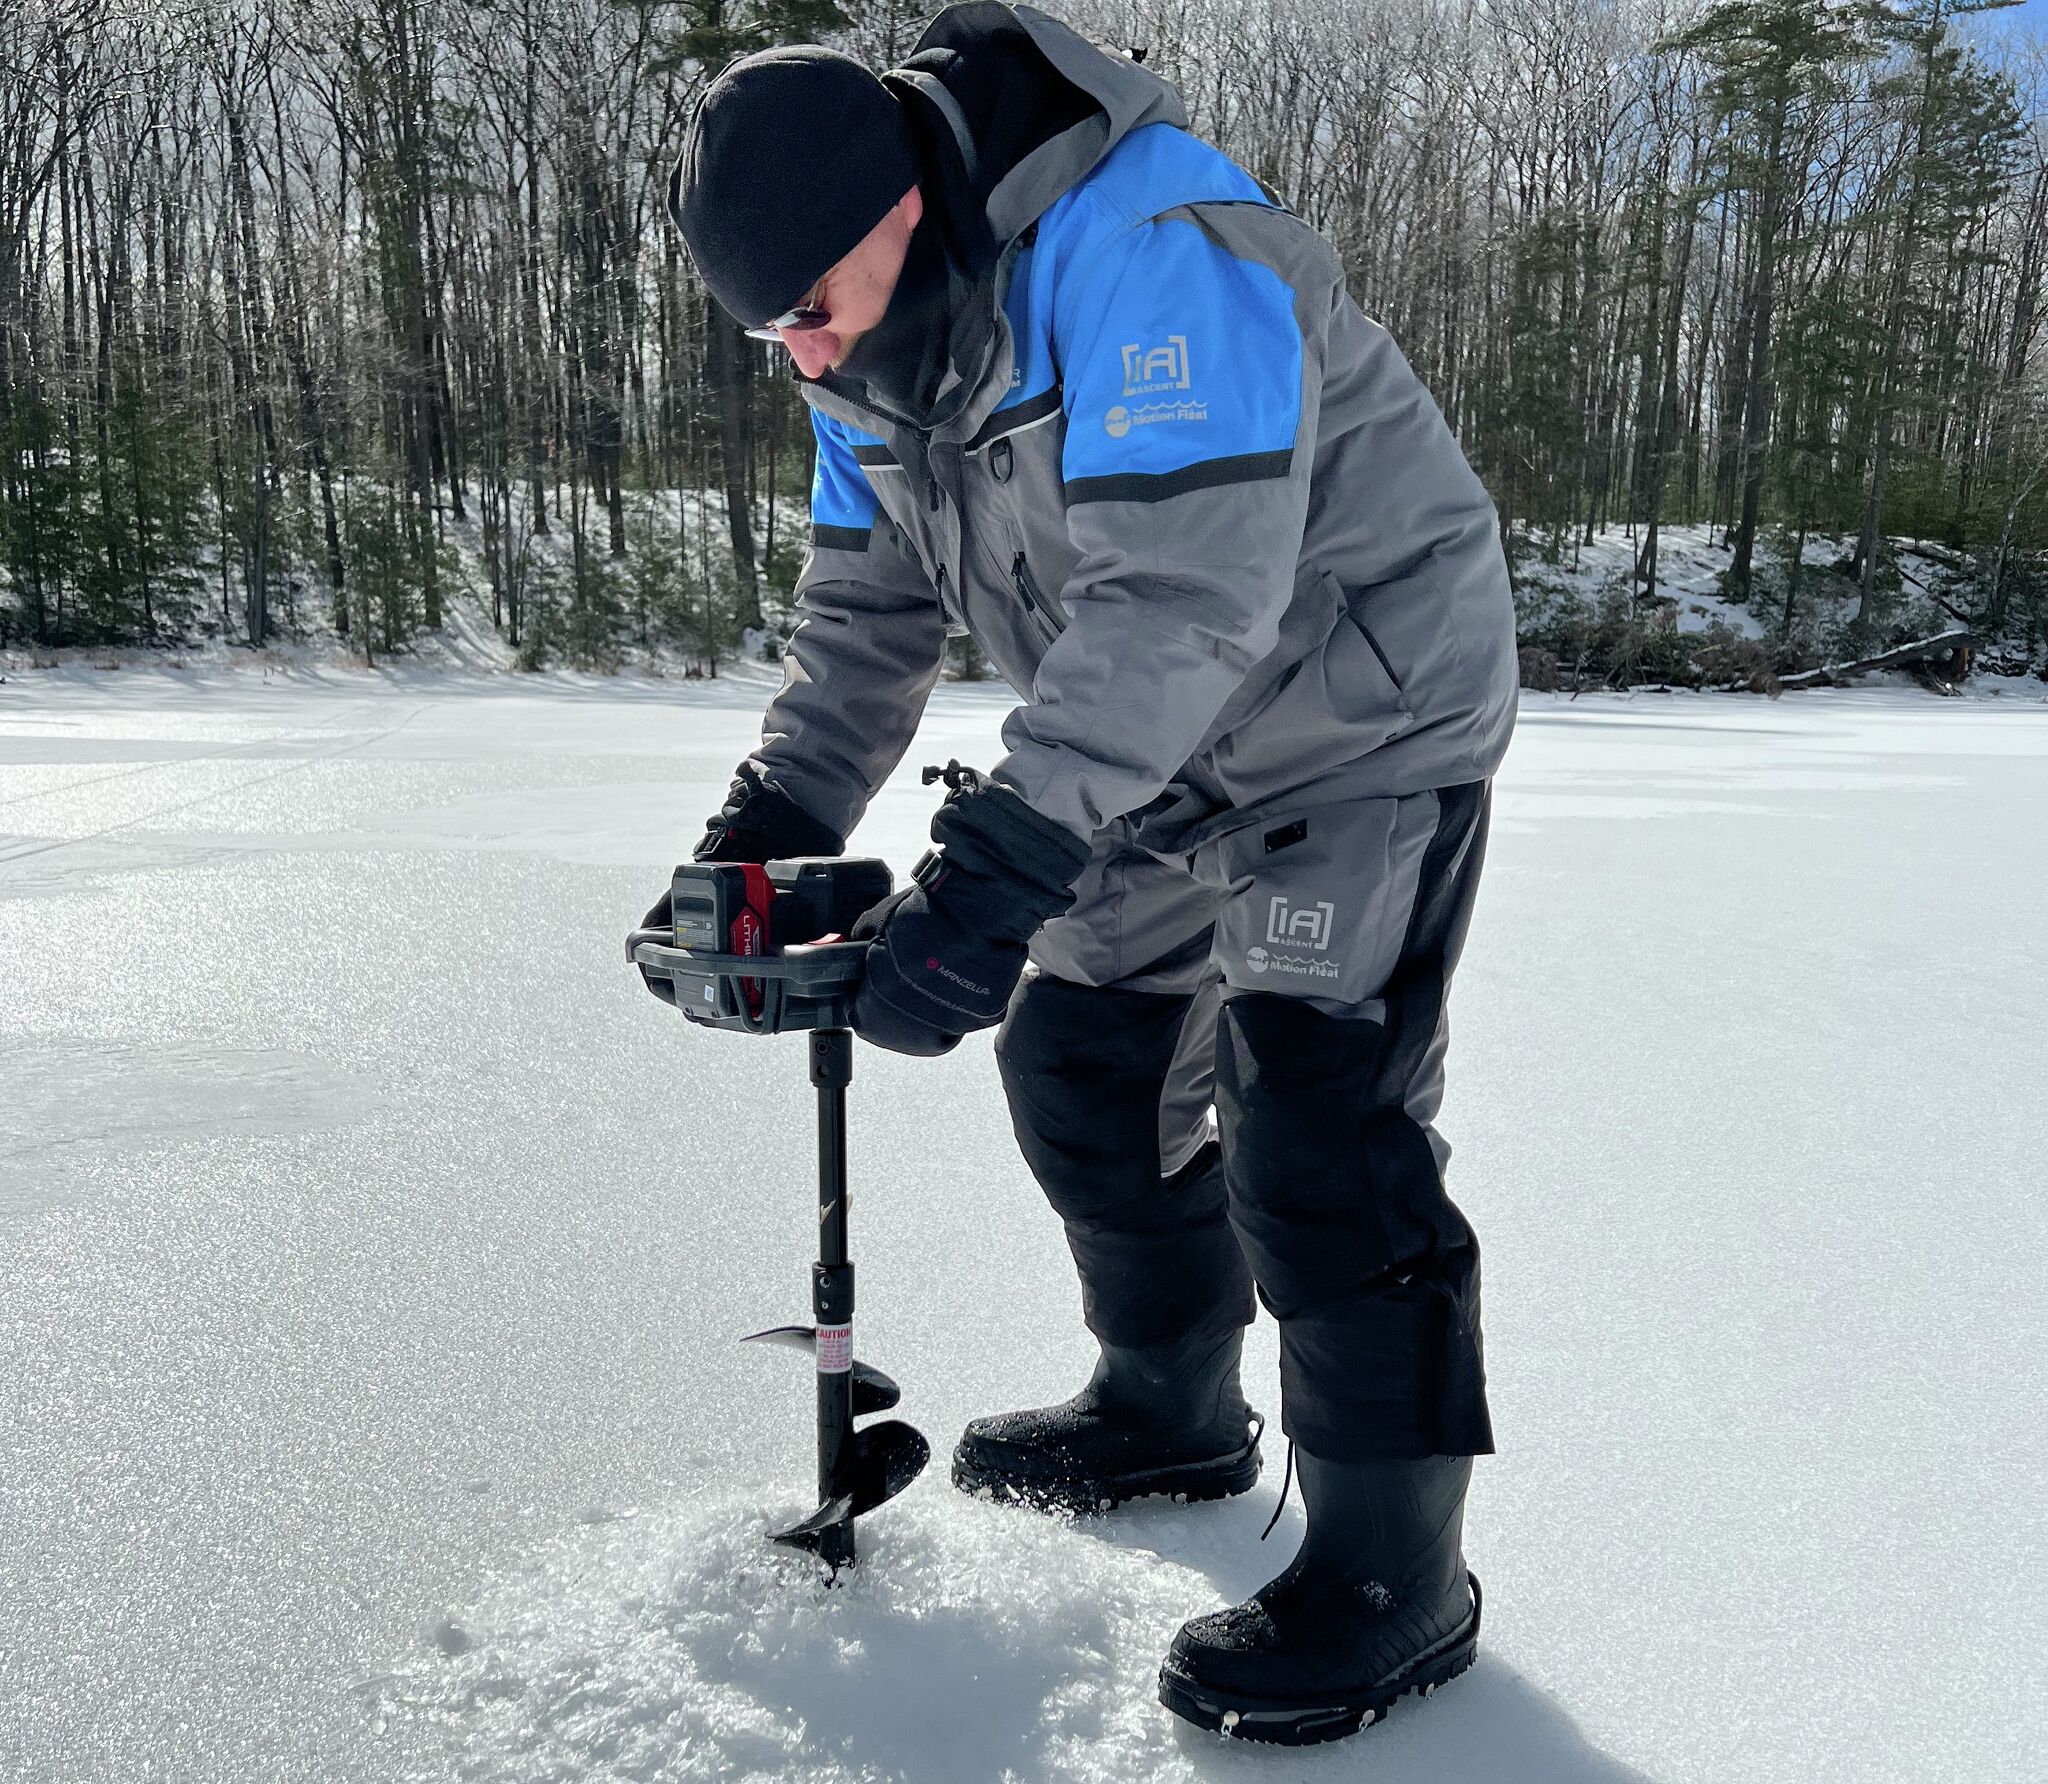 Steve Griffin has updated his book “Ice Fishing: Methods and Magic